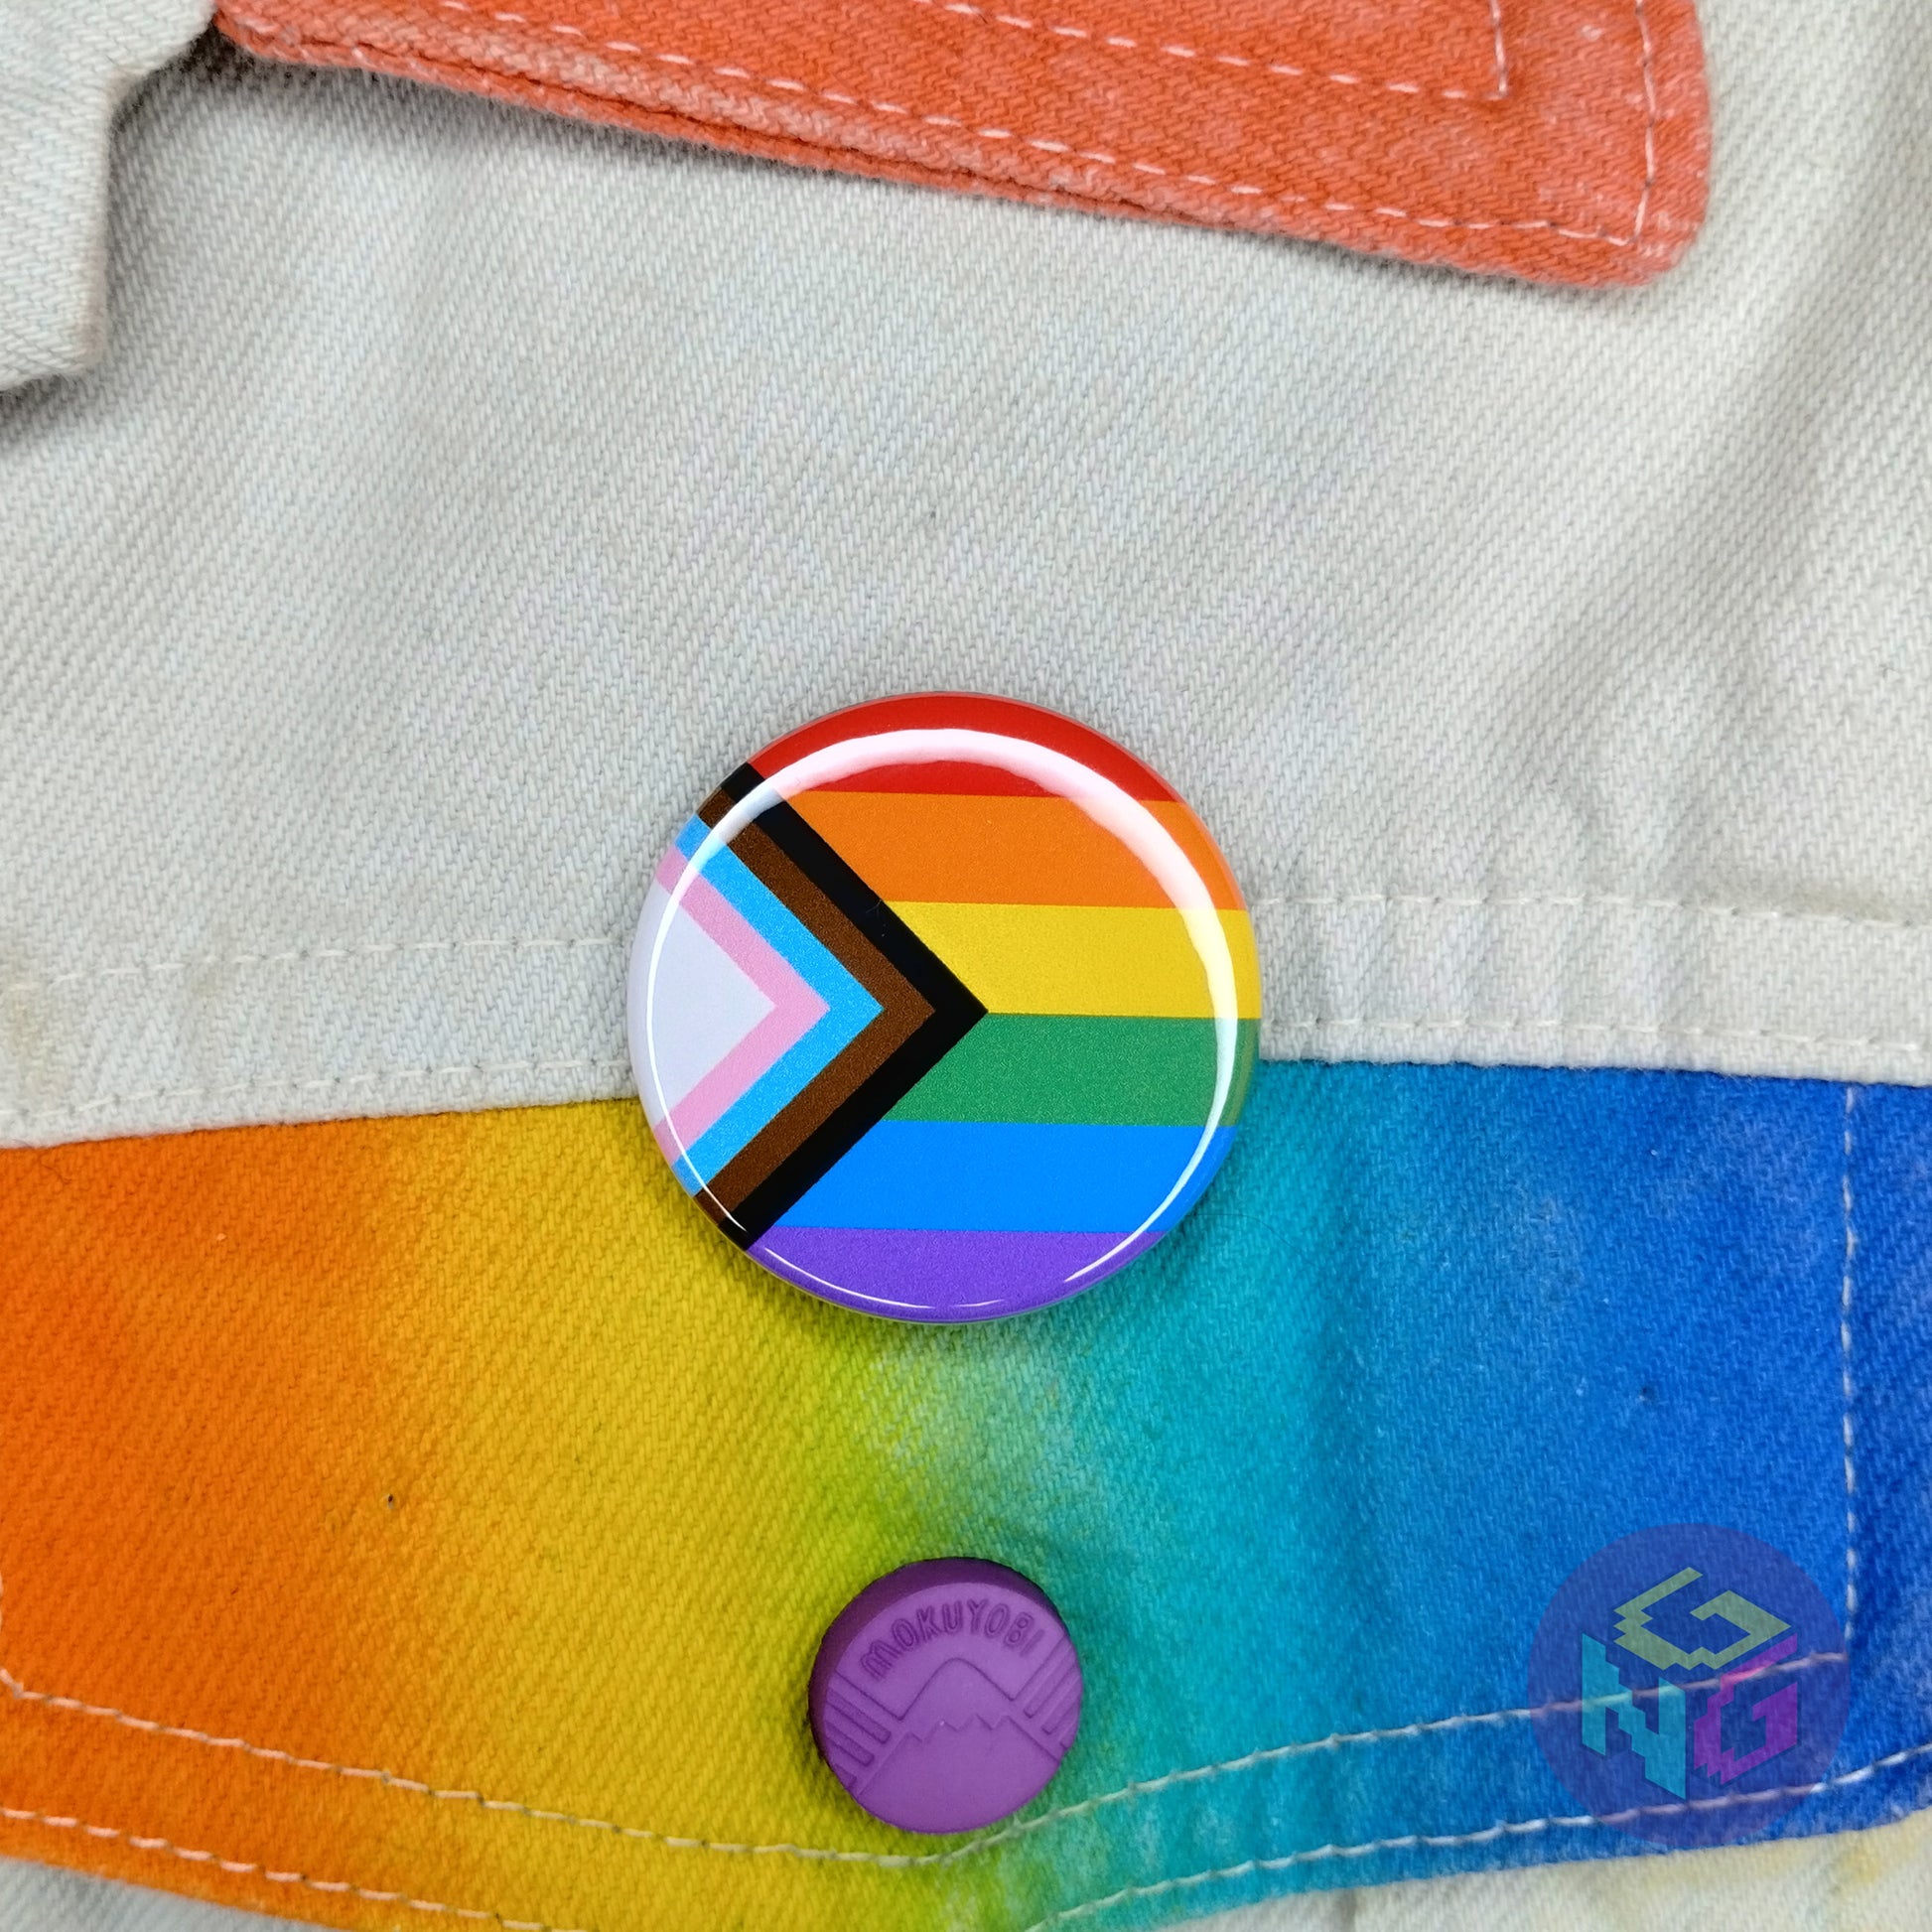 progress pride inclusive round flag button pinned to white denim jacket with rainbow details